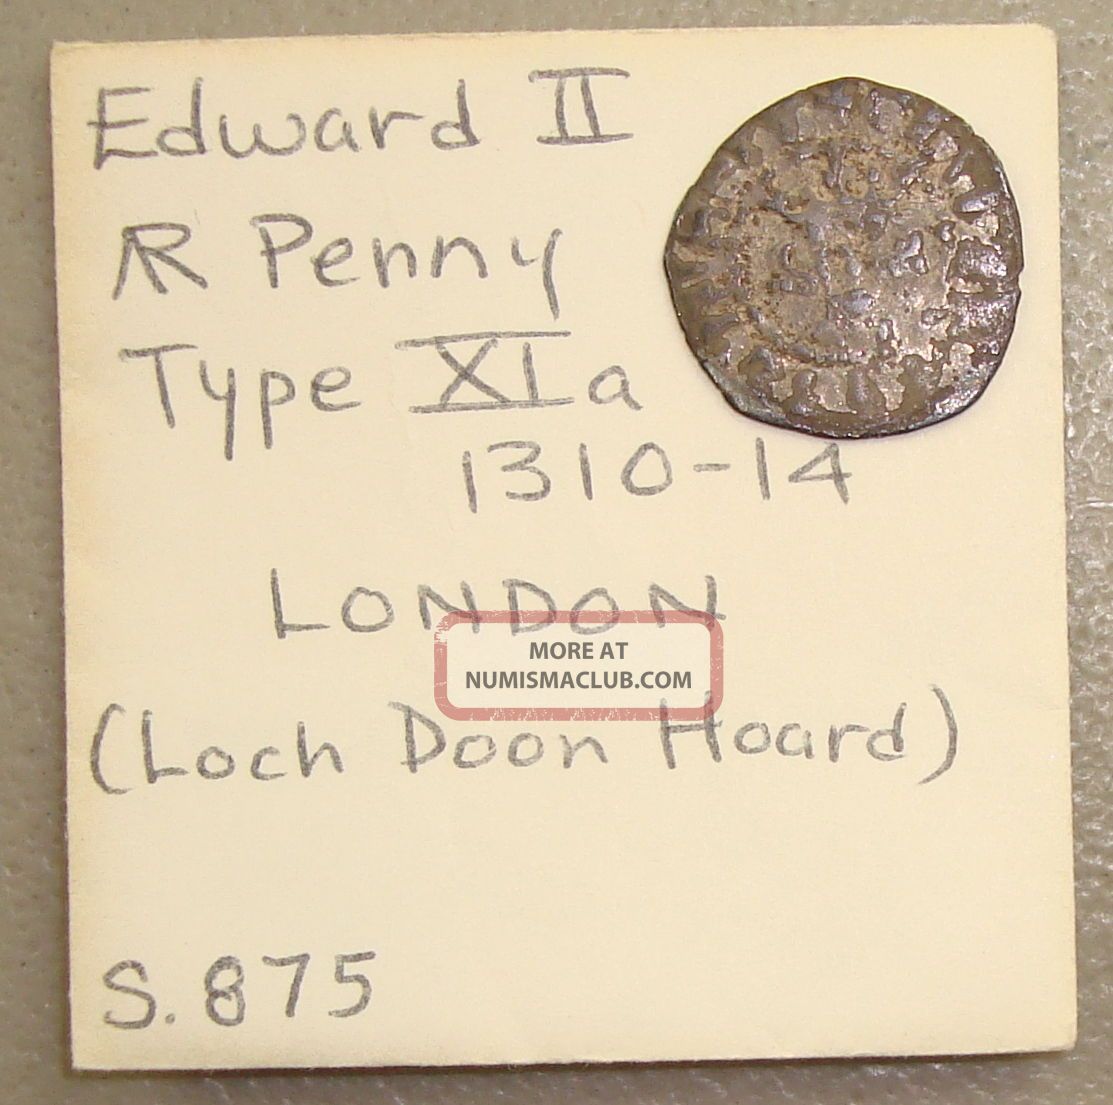 1310 - 14 Edward Ii London Hammered Silver Penny From Loch Doon Treasure Hoard Coins: Medieval photo